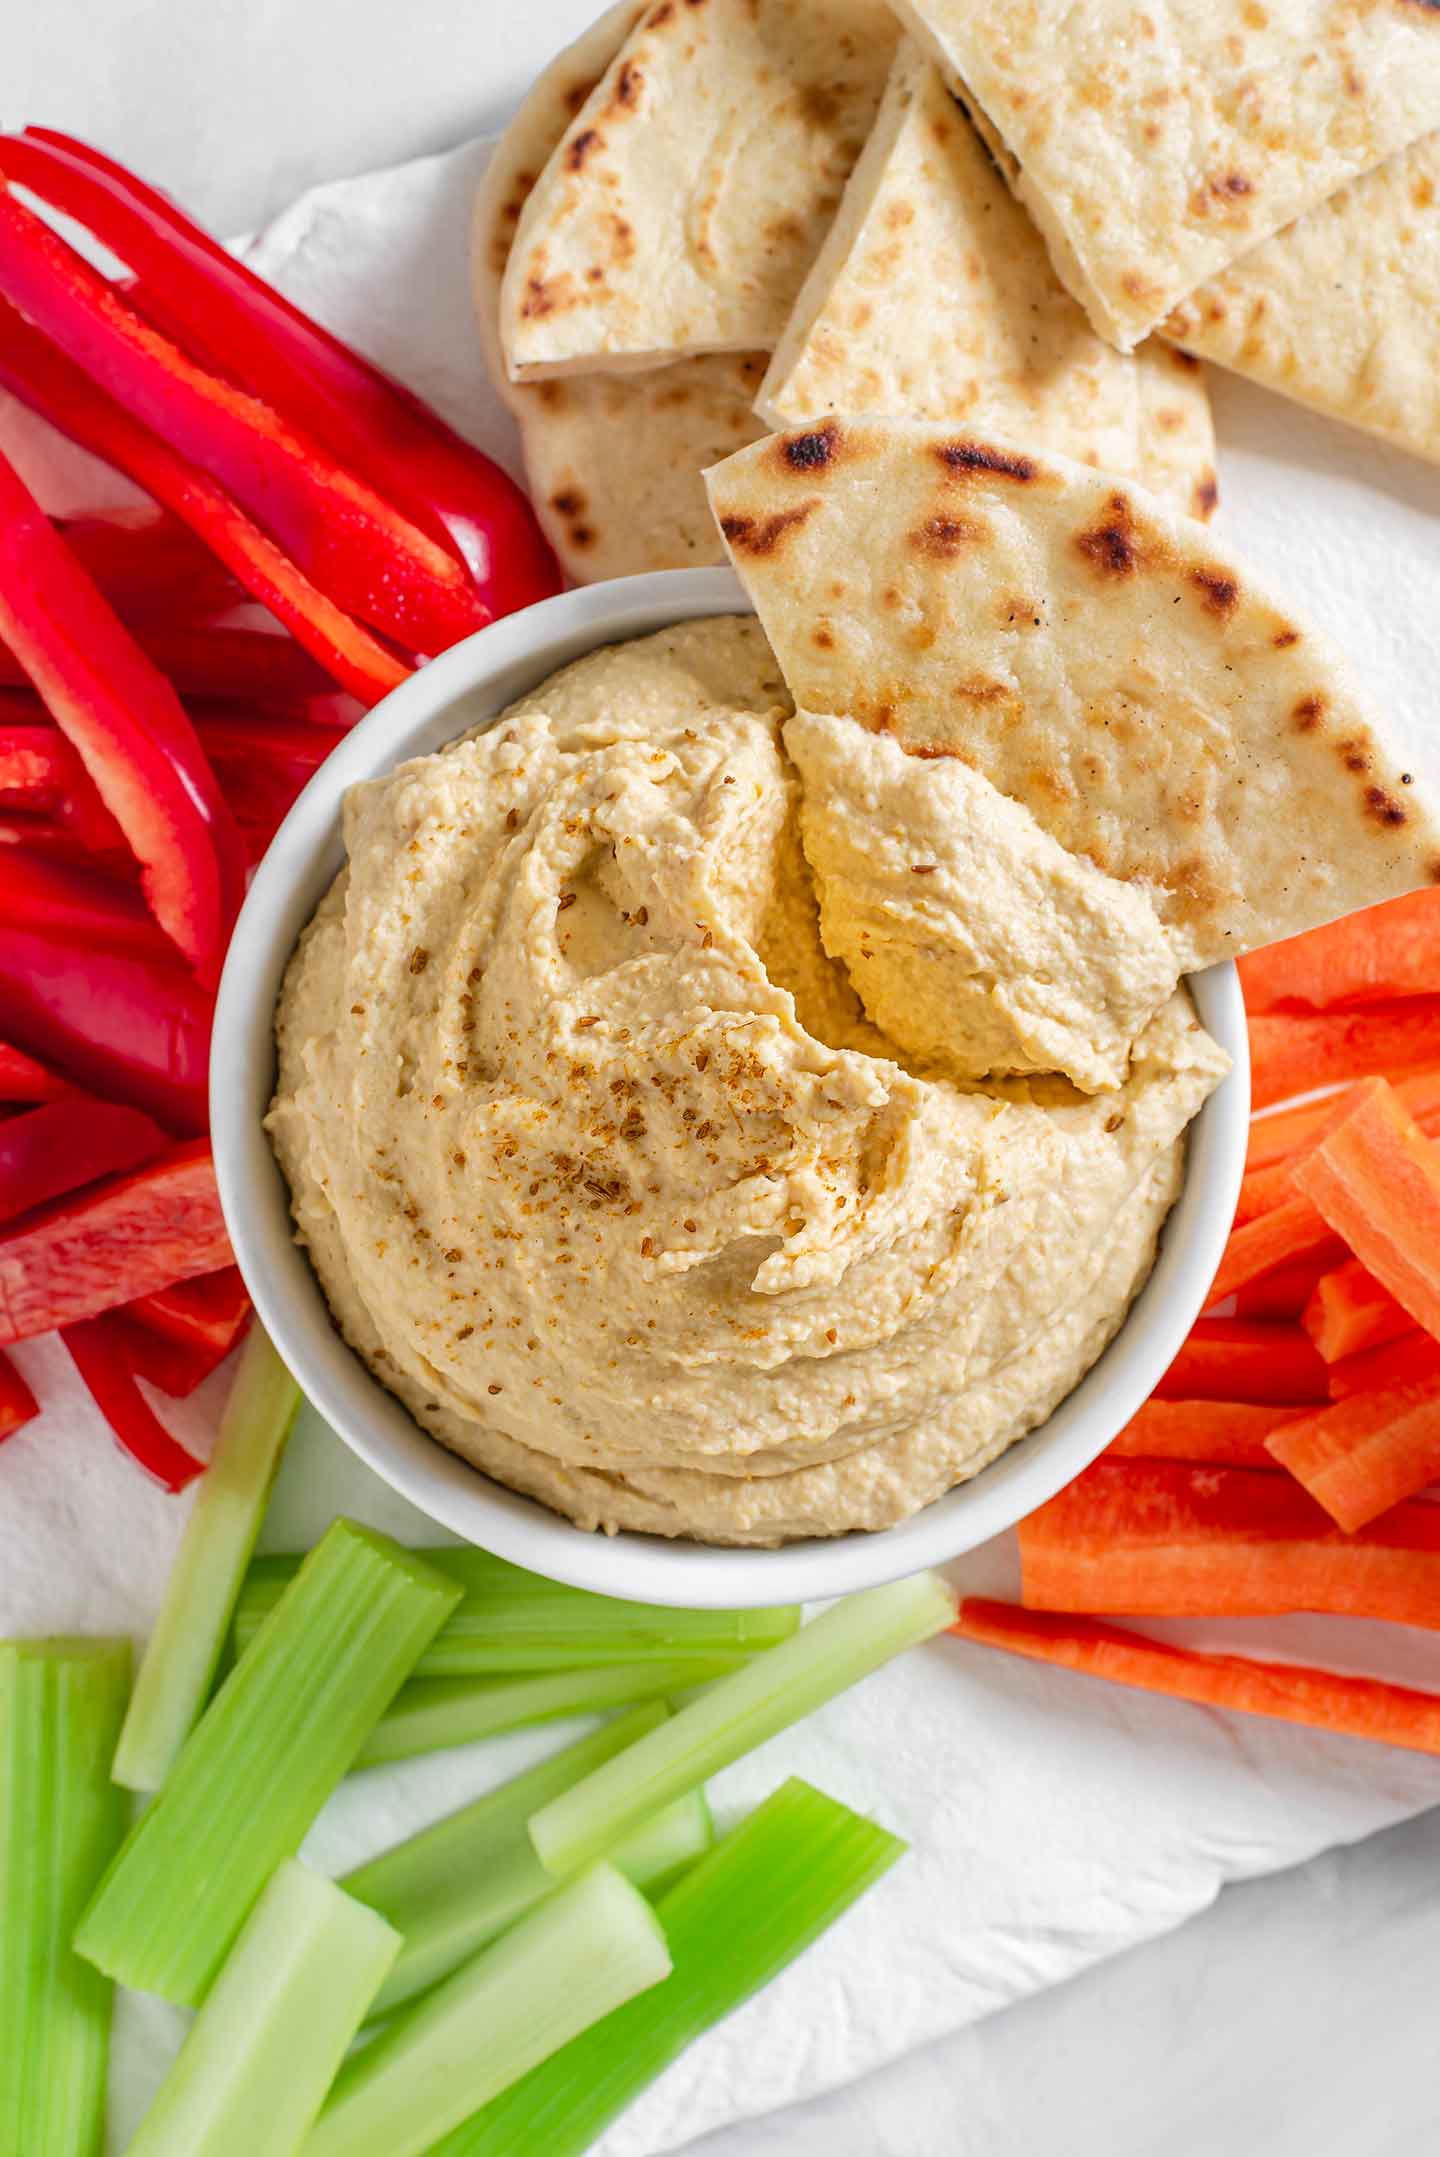 A slice of naan with a scoop of hummus rests in a bowl of creamy hummus. Sliced carrots, red peppers, celery, and more naan bread surround the dip.